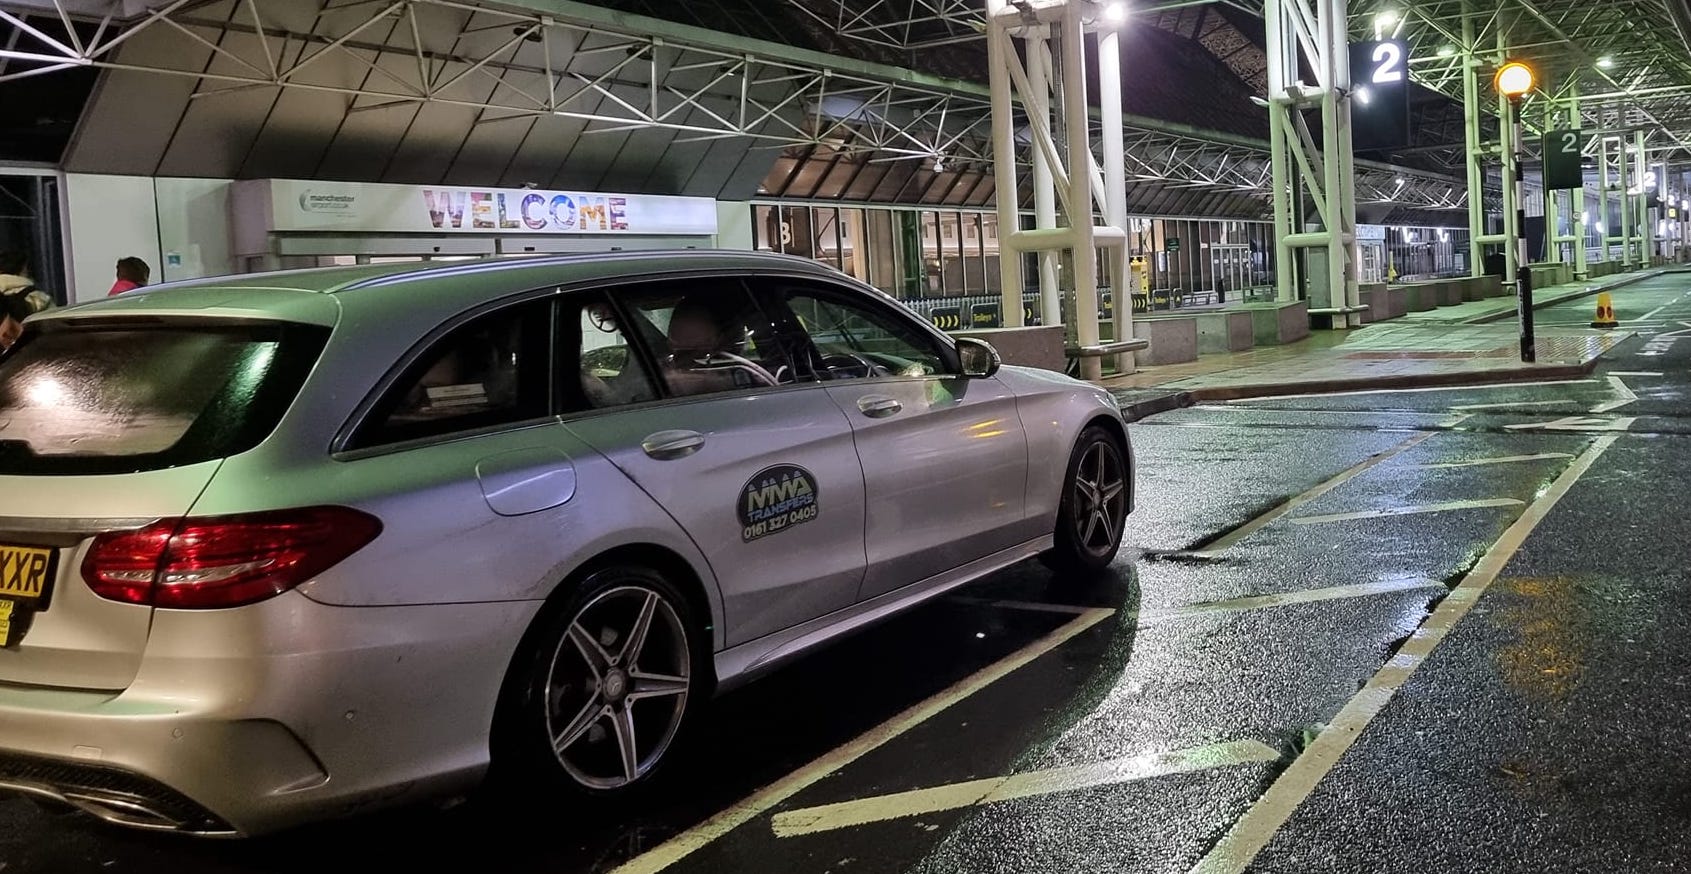 Take a Taxi from Manchester Airport to Halifax with a free Meet and Greet Service